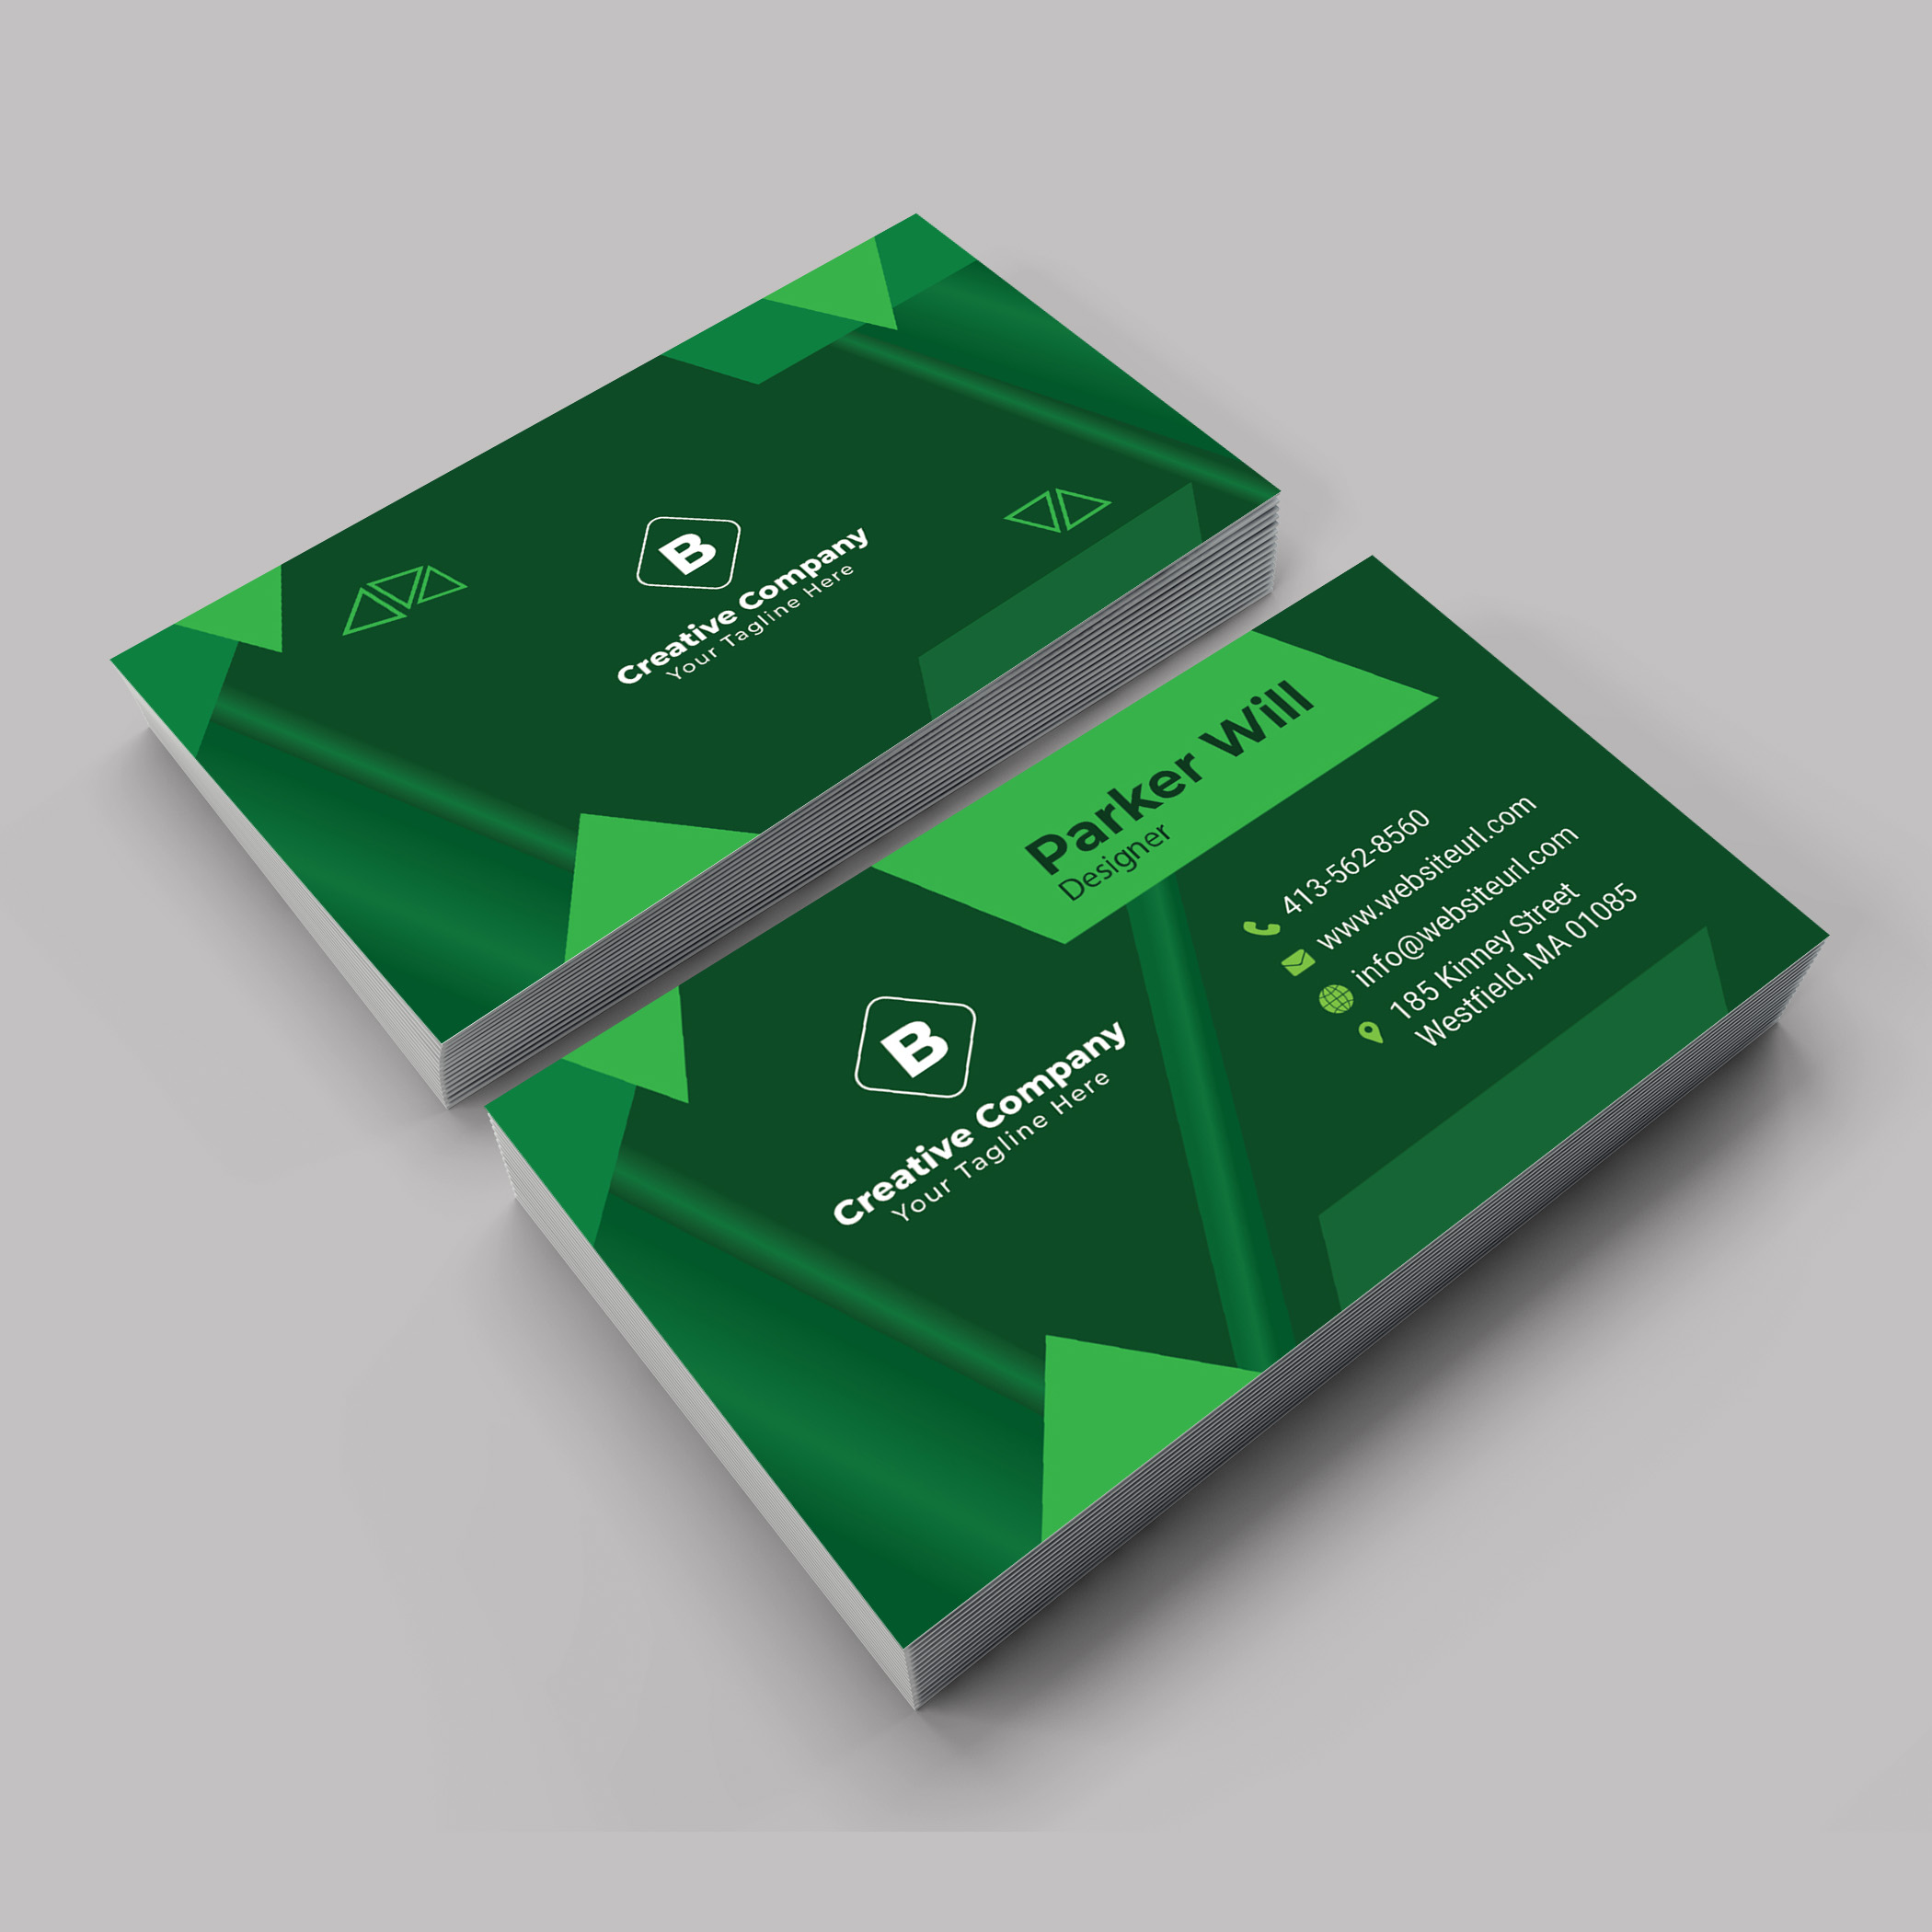 4 Corporate Business Cards Bundle, cards with green design.